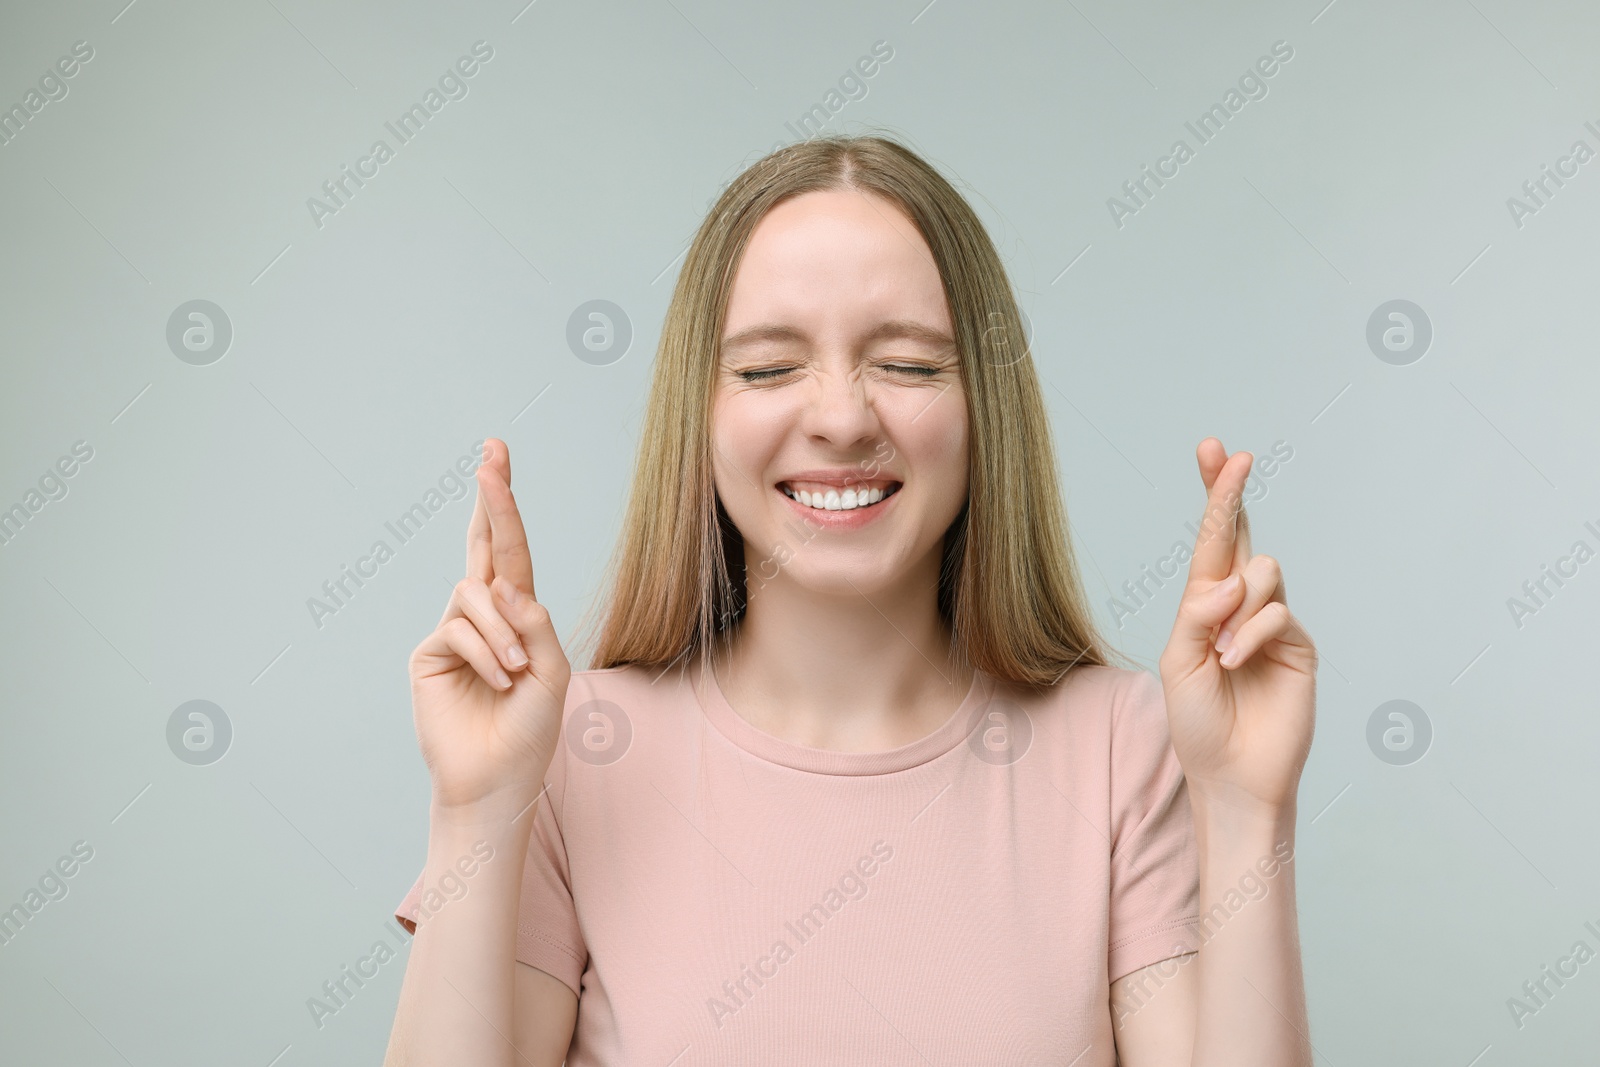 Photo of Woman crossing her fingers on grey background